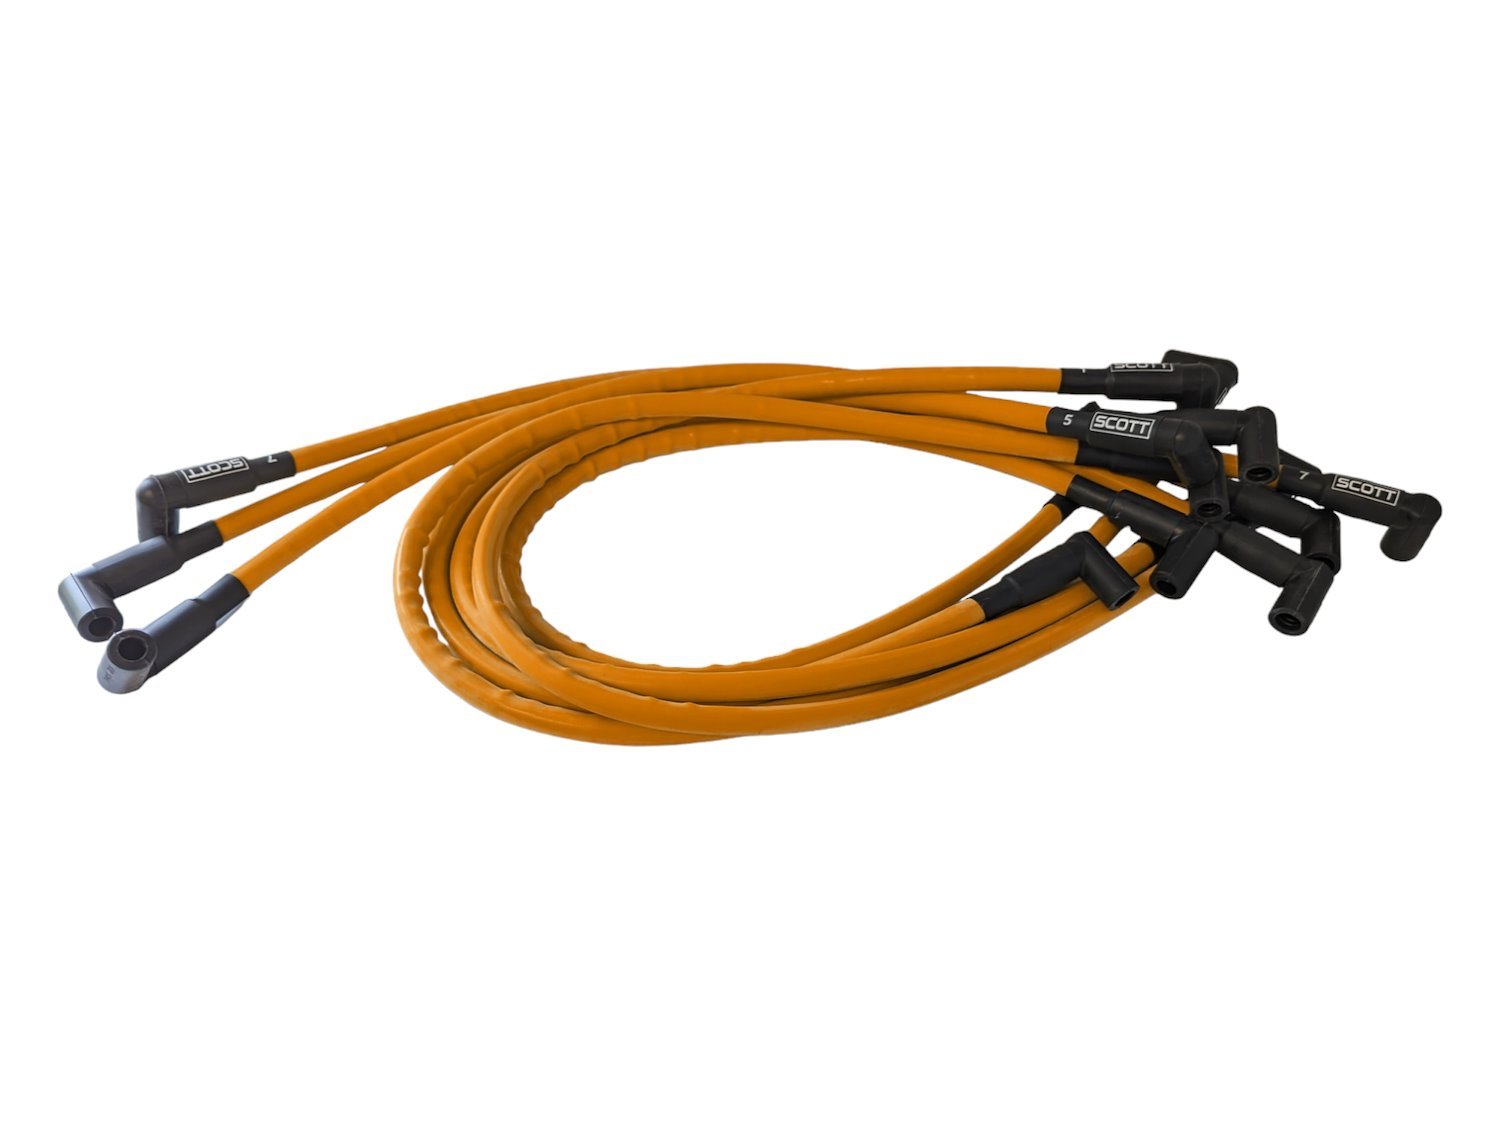 SPW-CH-604-5 High-Performance Silicone-Sleeved Spark Plug Wire Set for Small Block Chevy 604 Crate, Under Header [Orange]